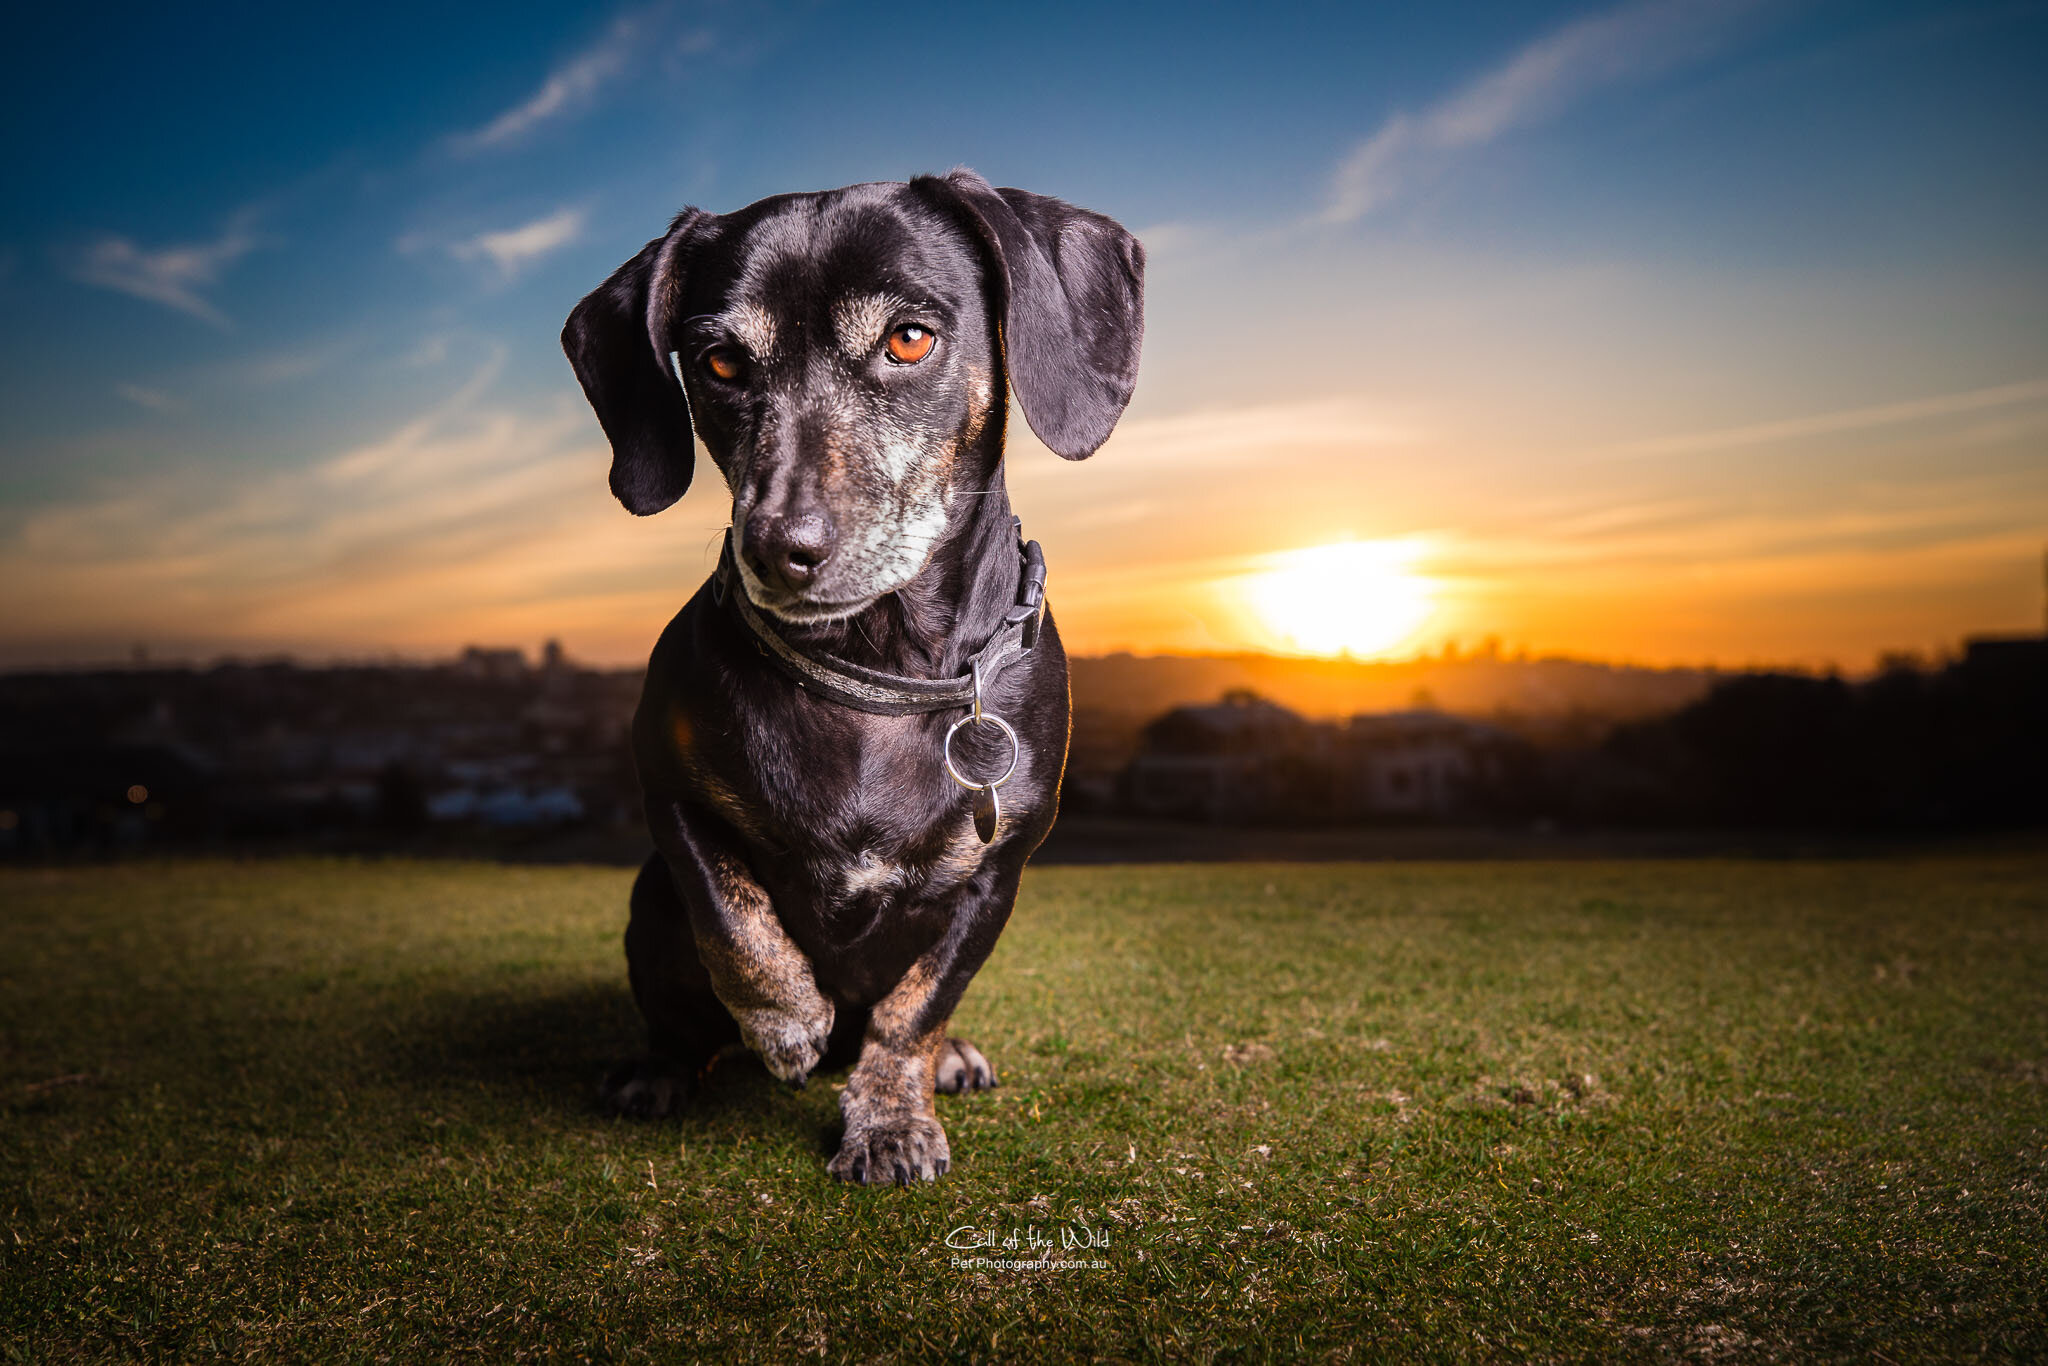 Call of the Wild Pet Photography, Scarlett the rescue dog, Queen of Bondi Beach